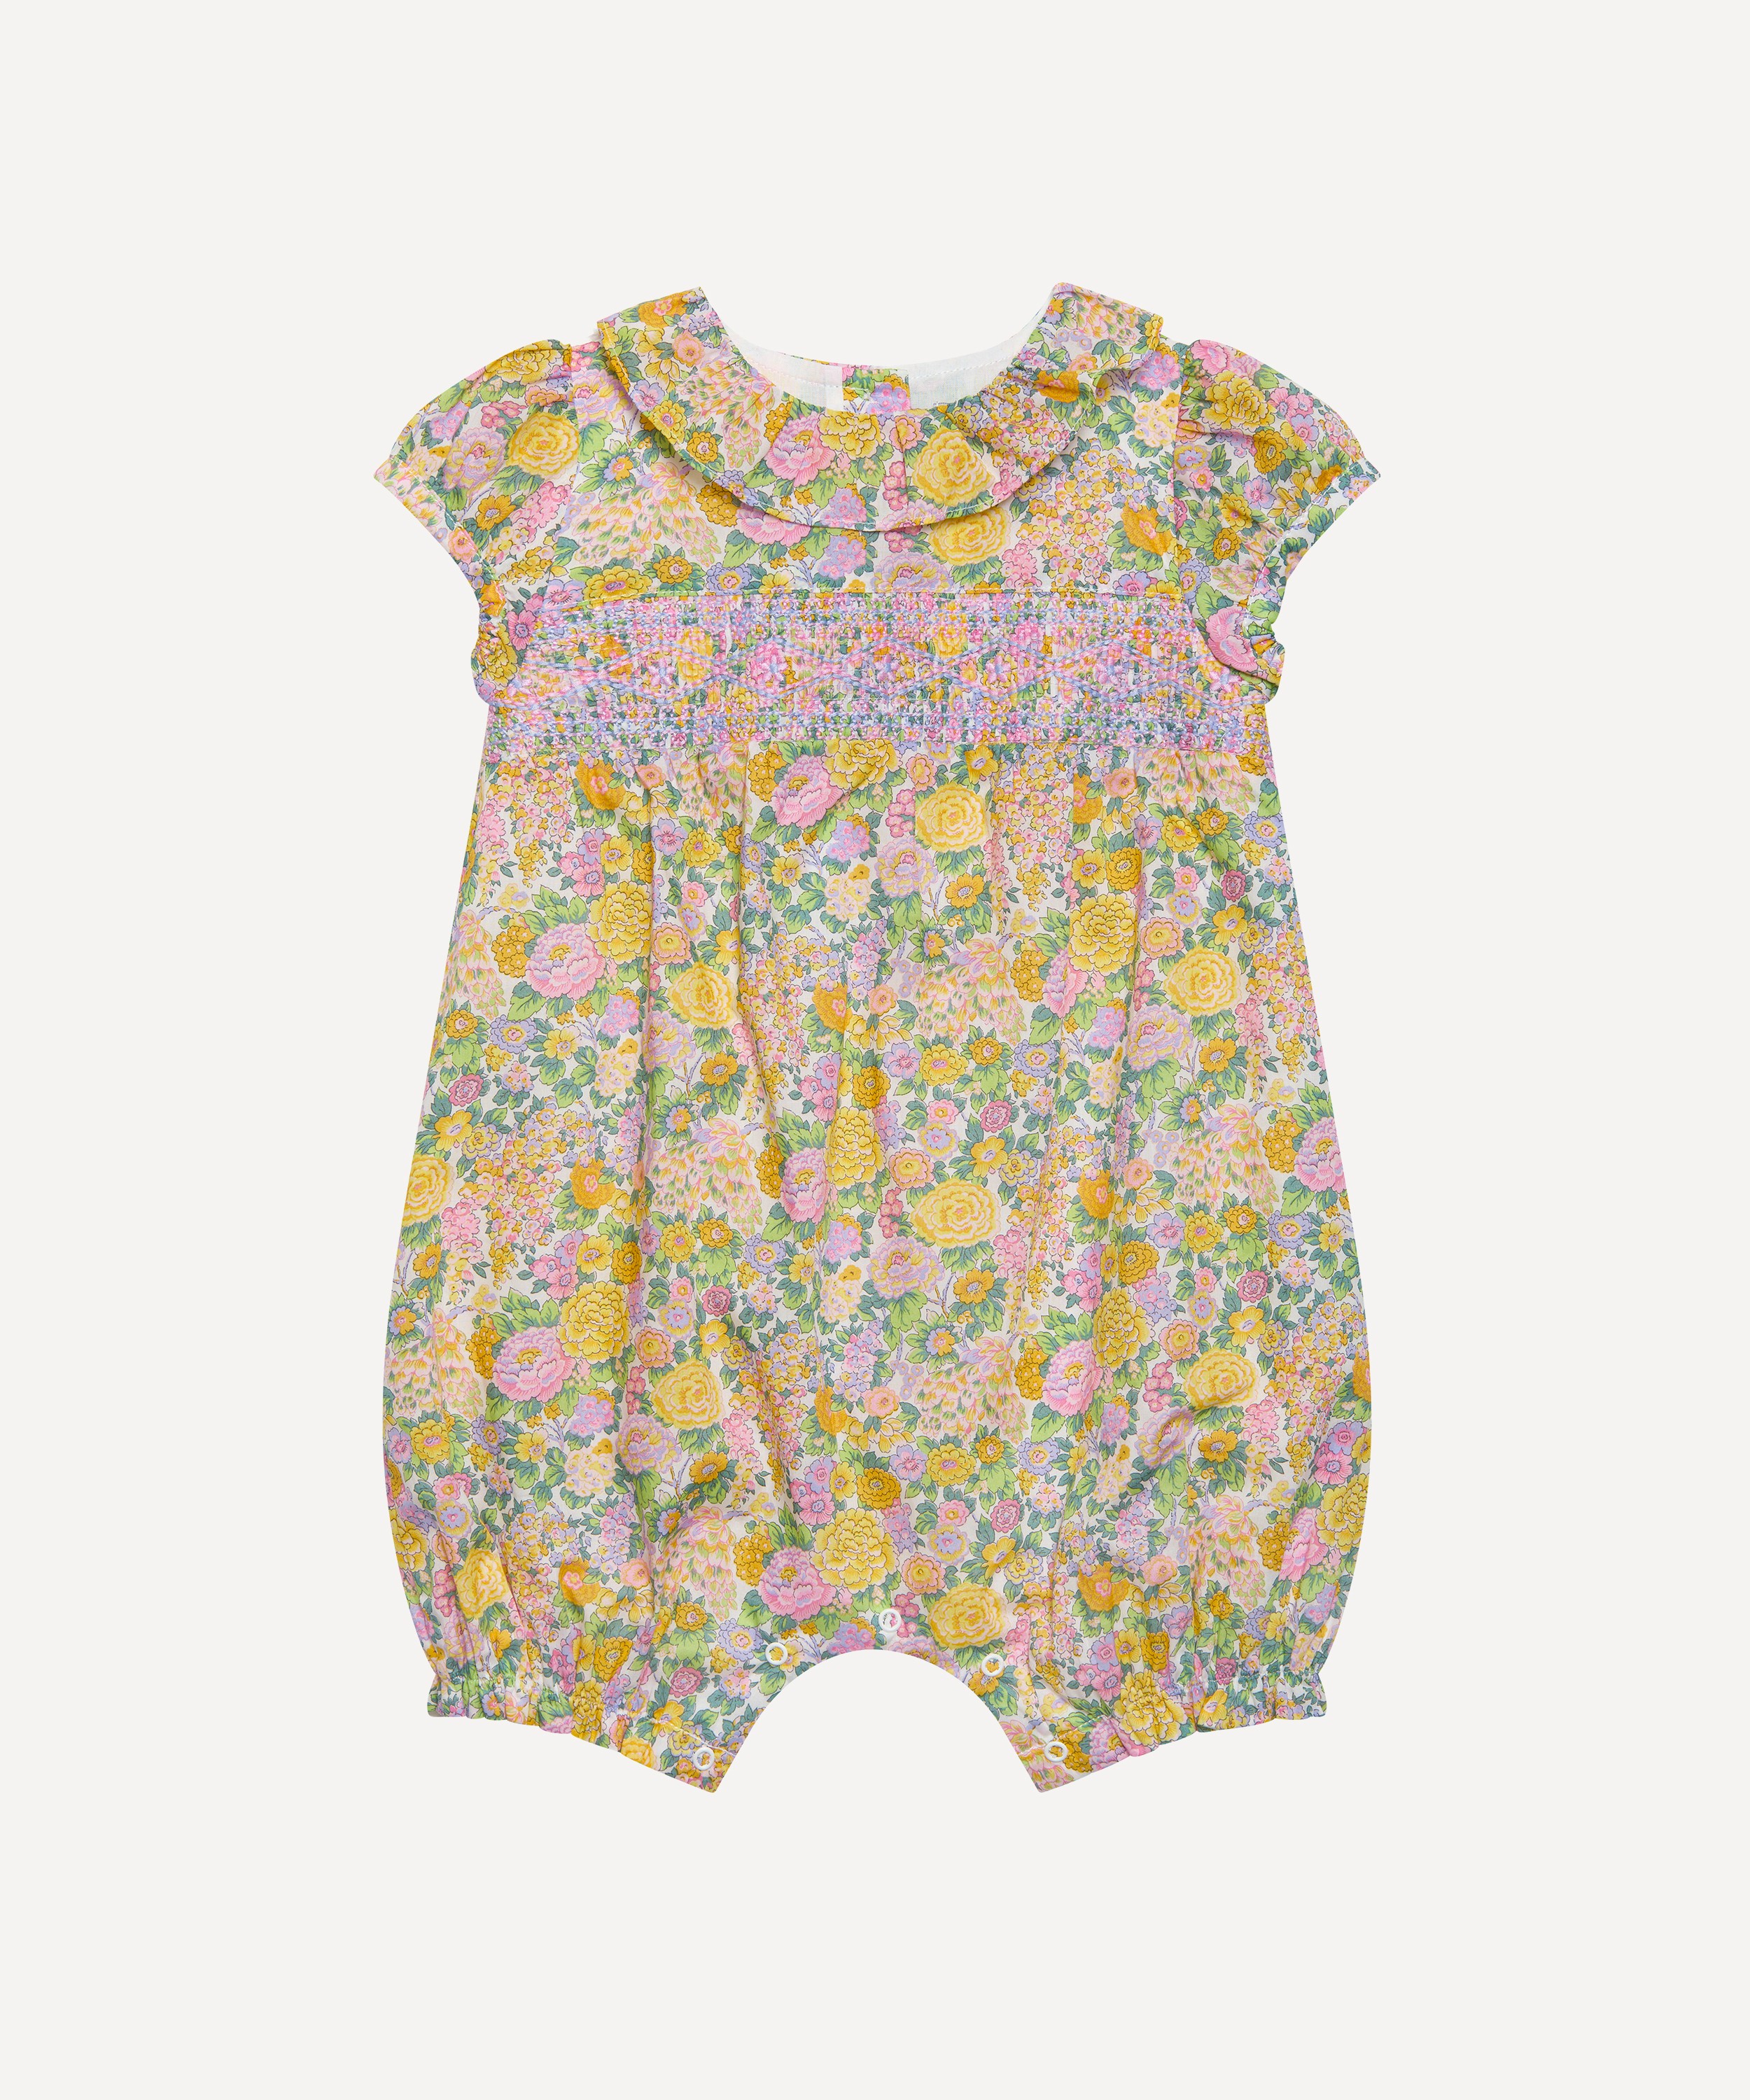 Trotters - Elysian Day Smocked Willow Romper 3-24 Months image number 0